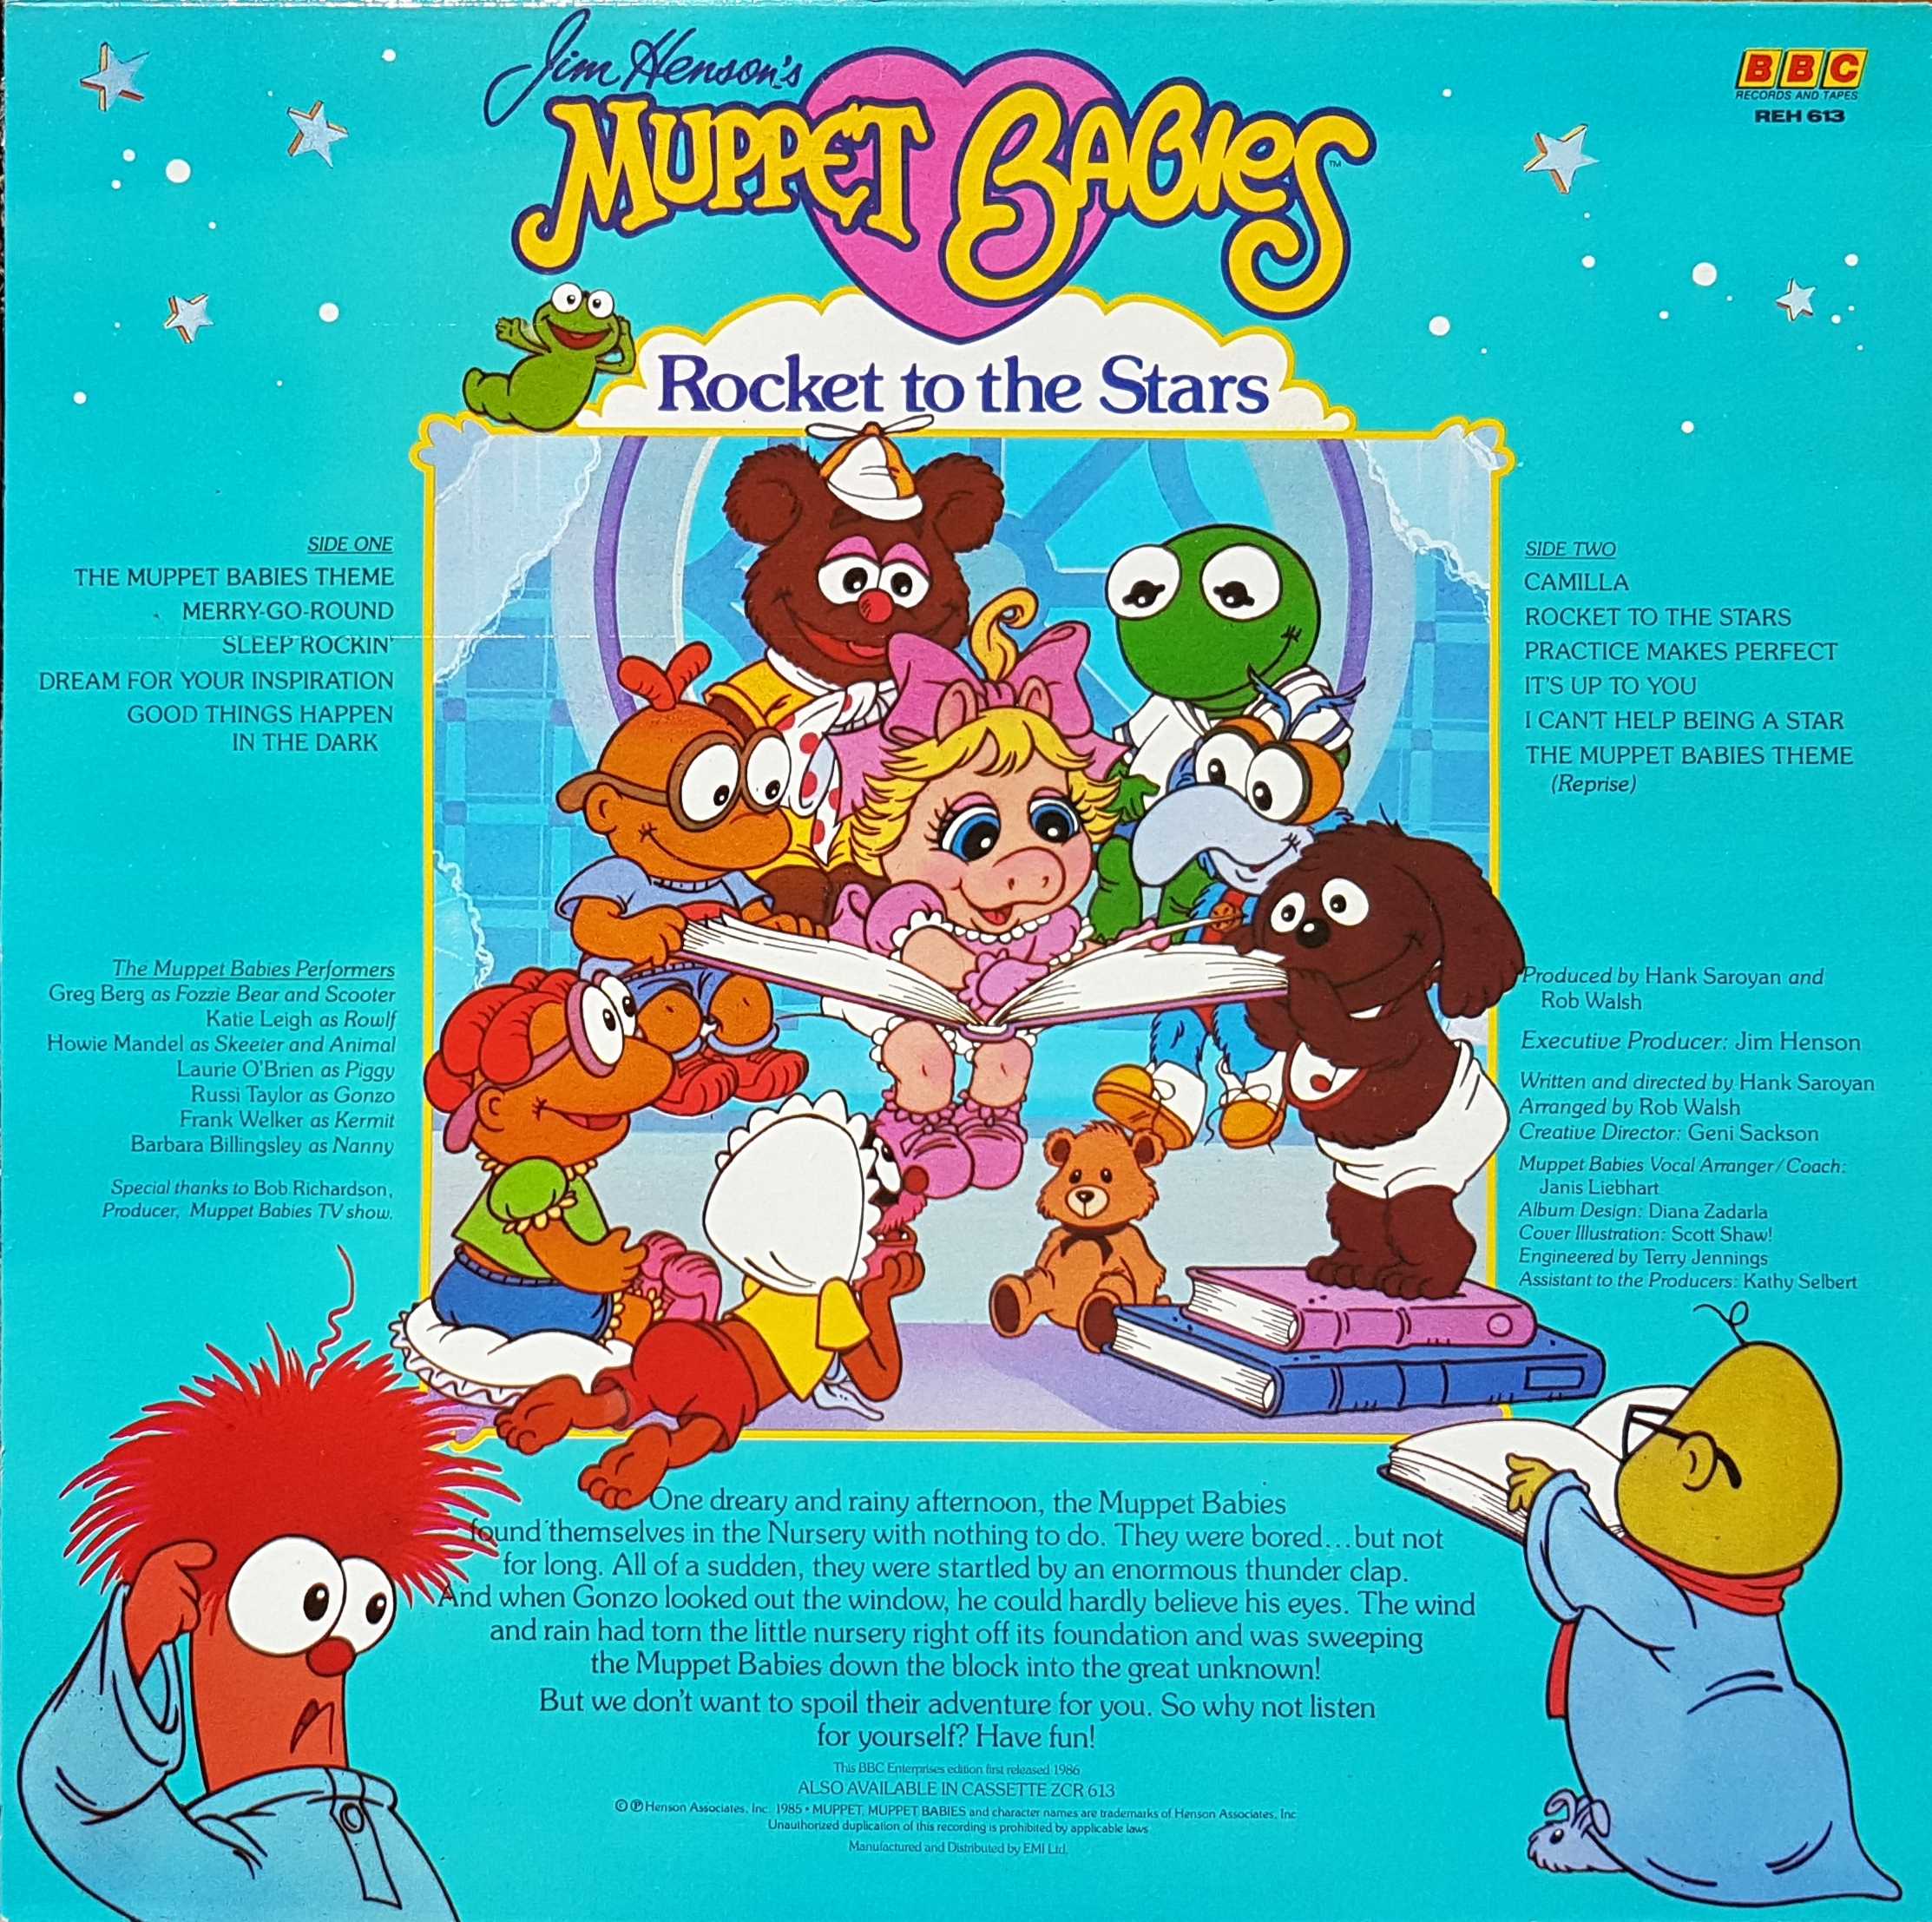 Picture of REH 613 The muppet babies by artist Hank Saroyan / Arr. Rob Walsh from the BBC records and Tapes library